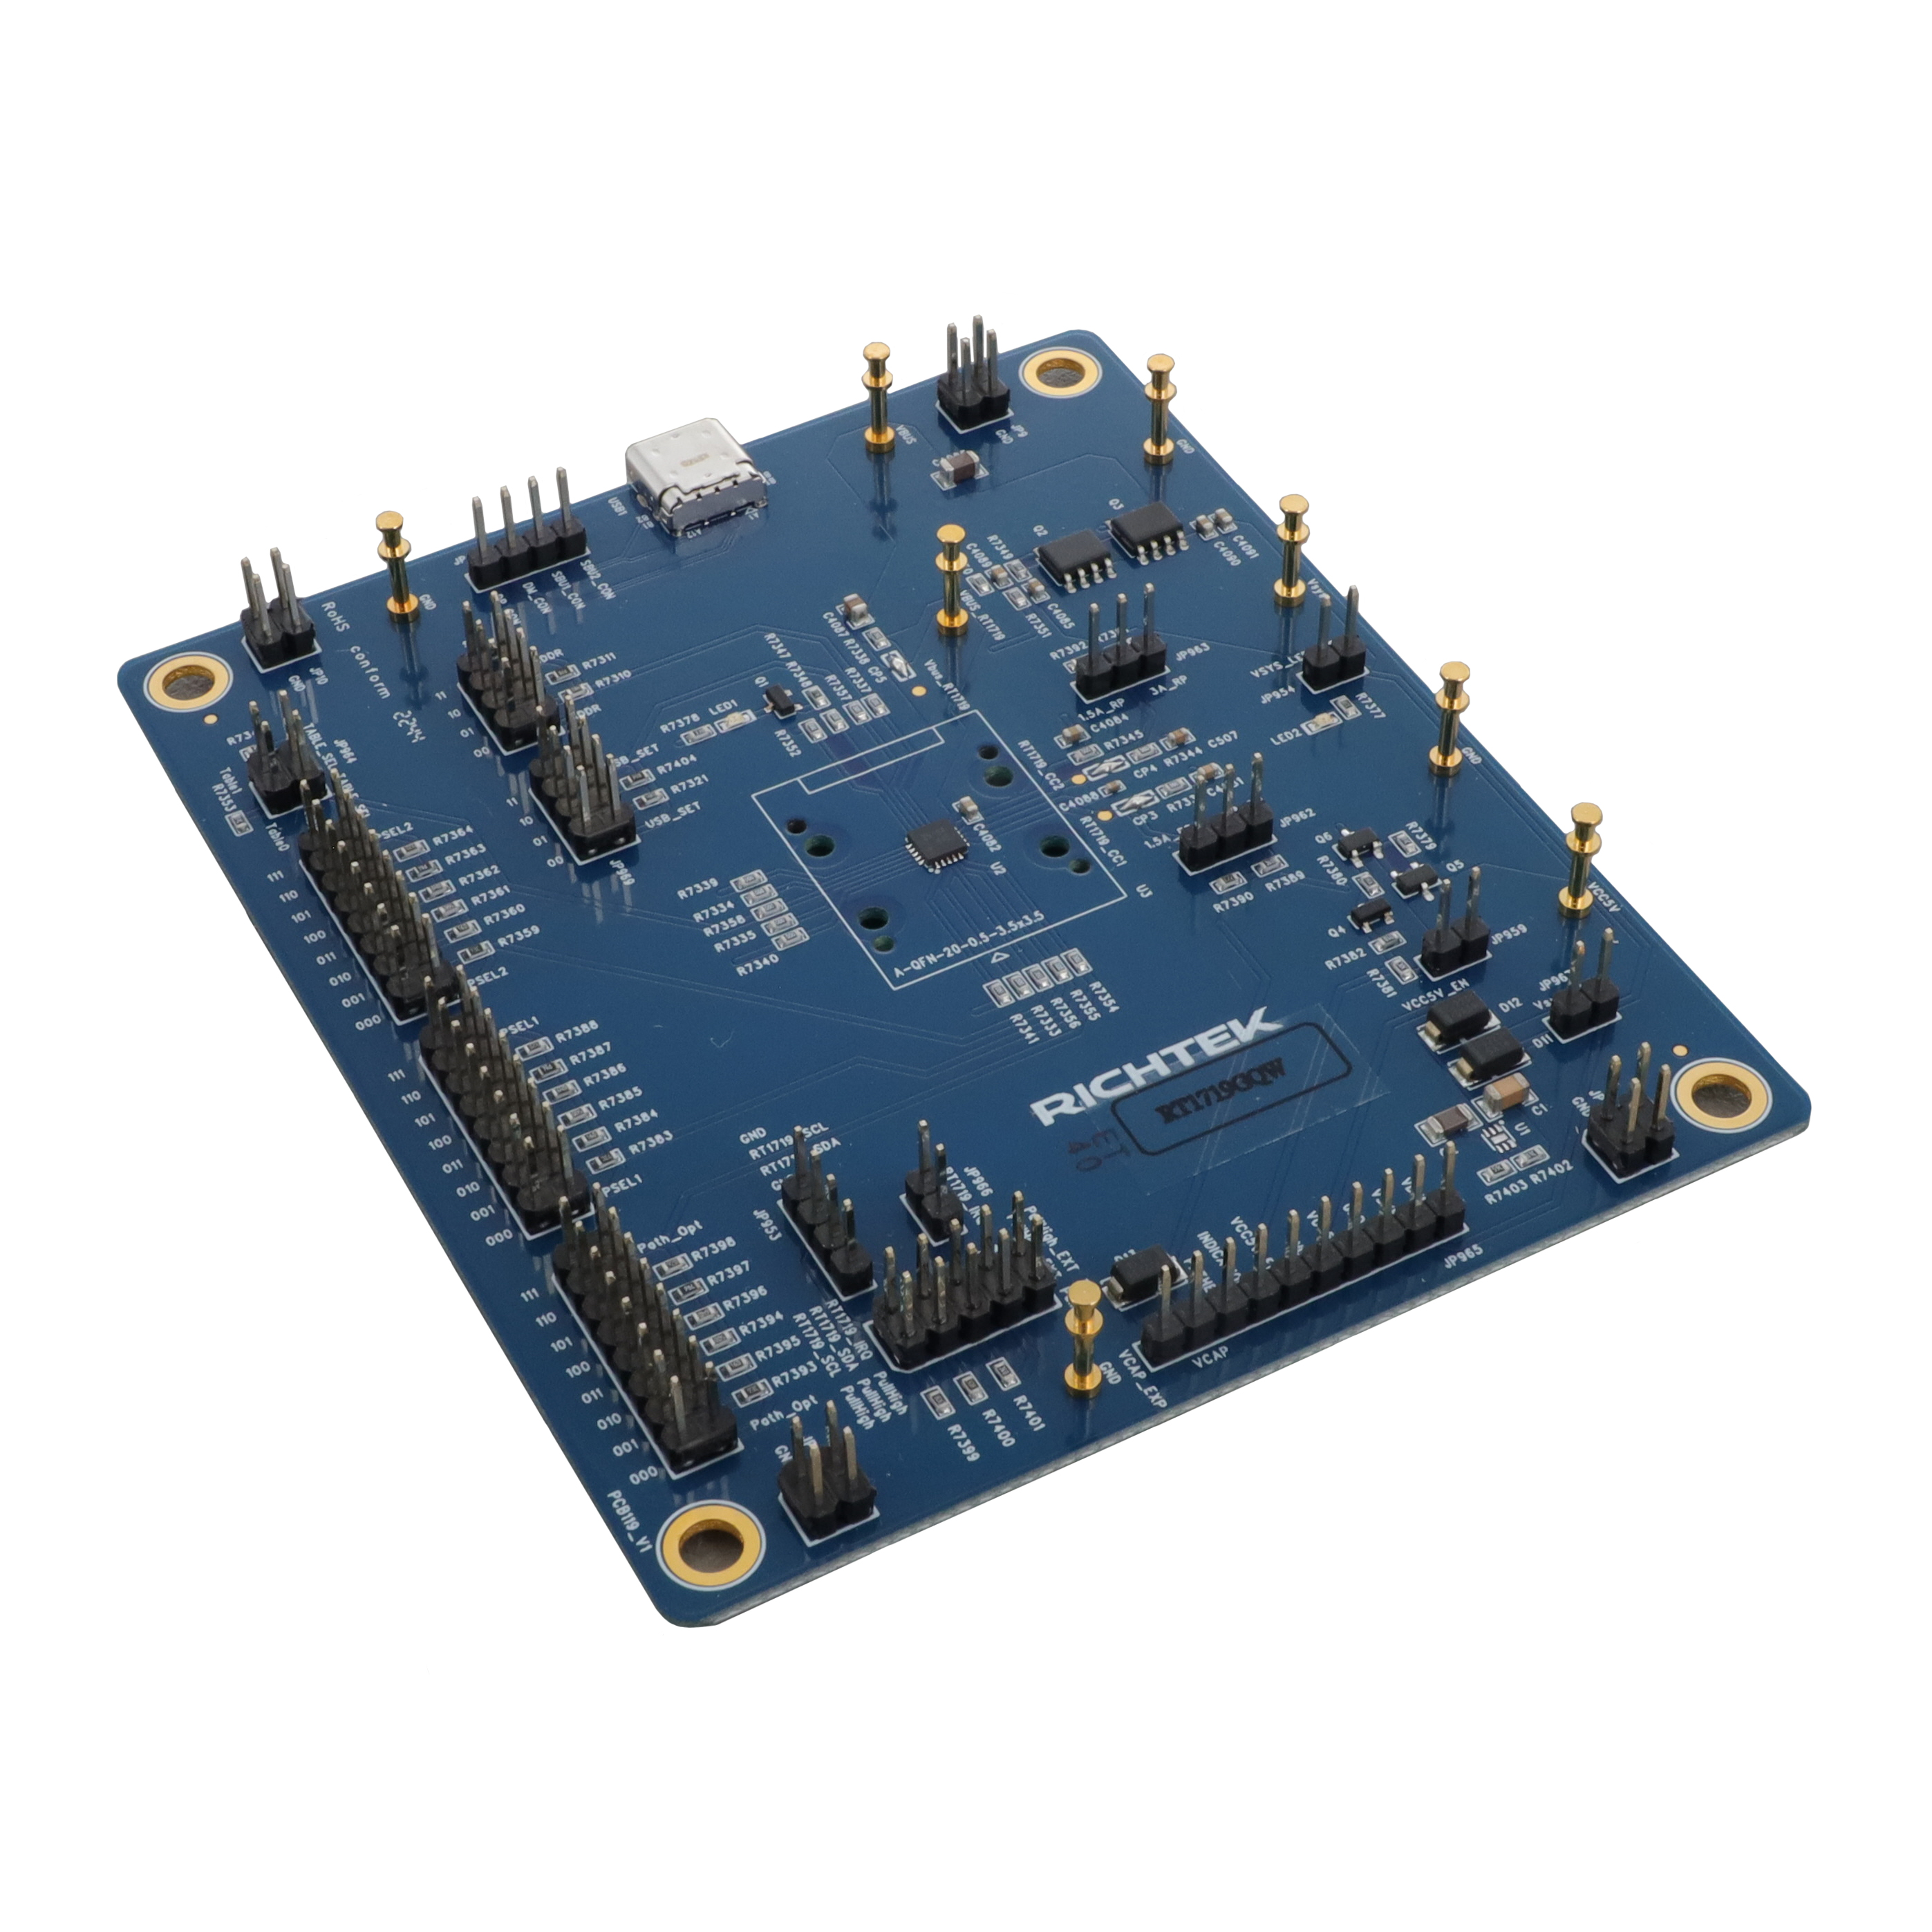 【EVB_RT1719GQW】EVALUATION BOARD FOR RT1719GQW